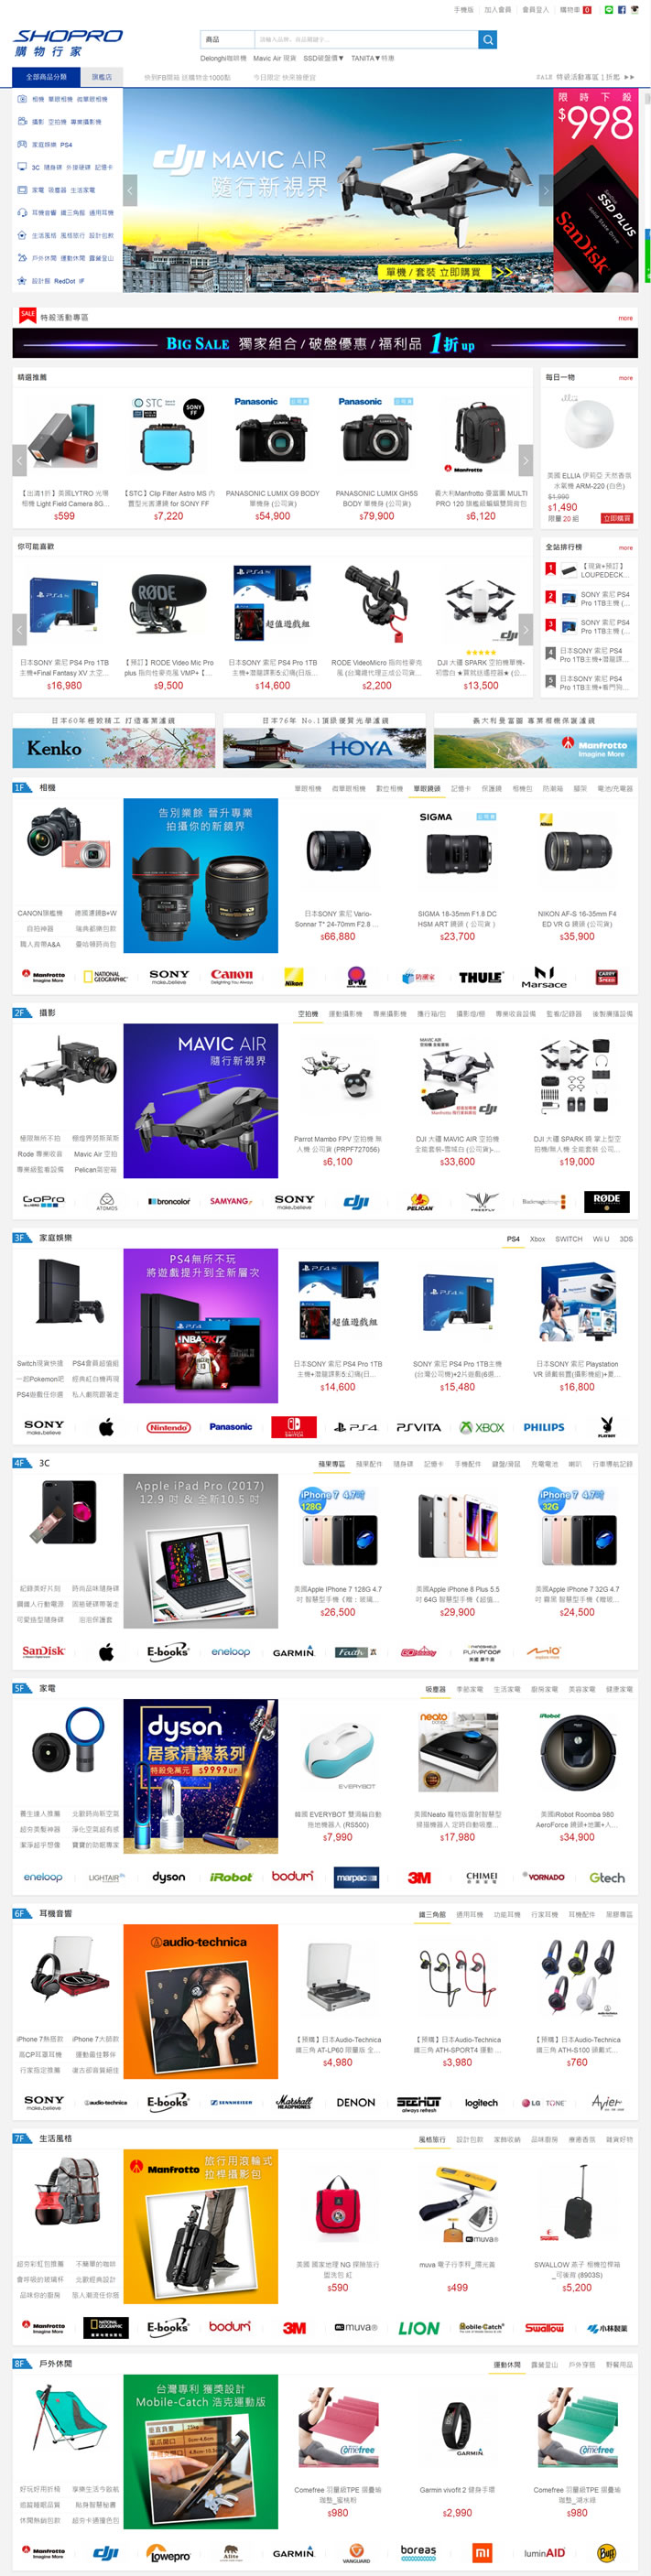 Taiwan Camera and Photography Products Shopping Site: SHOPRO